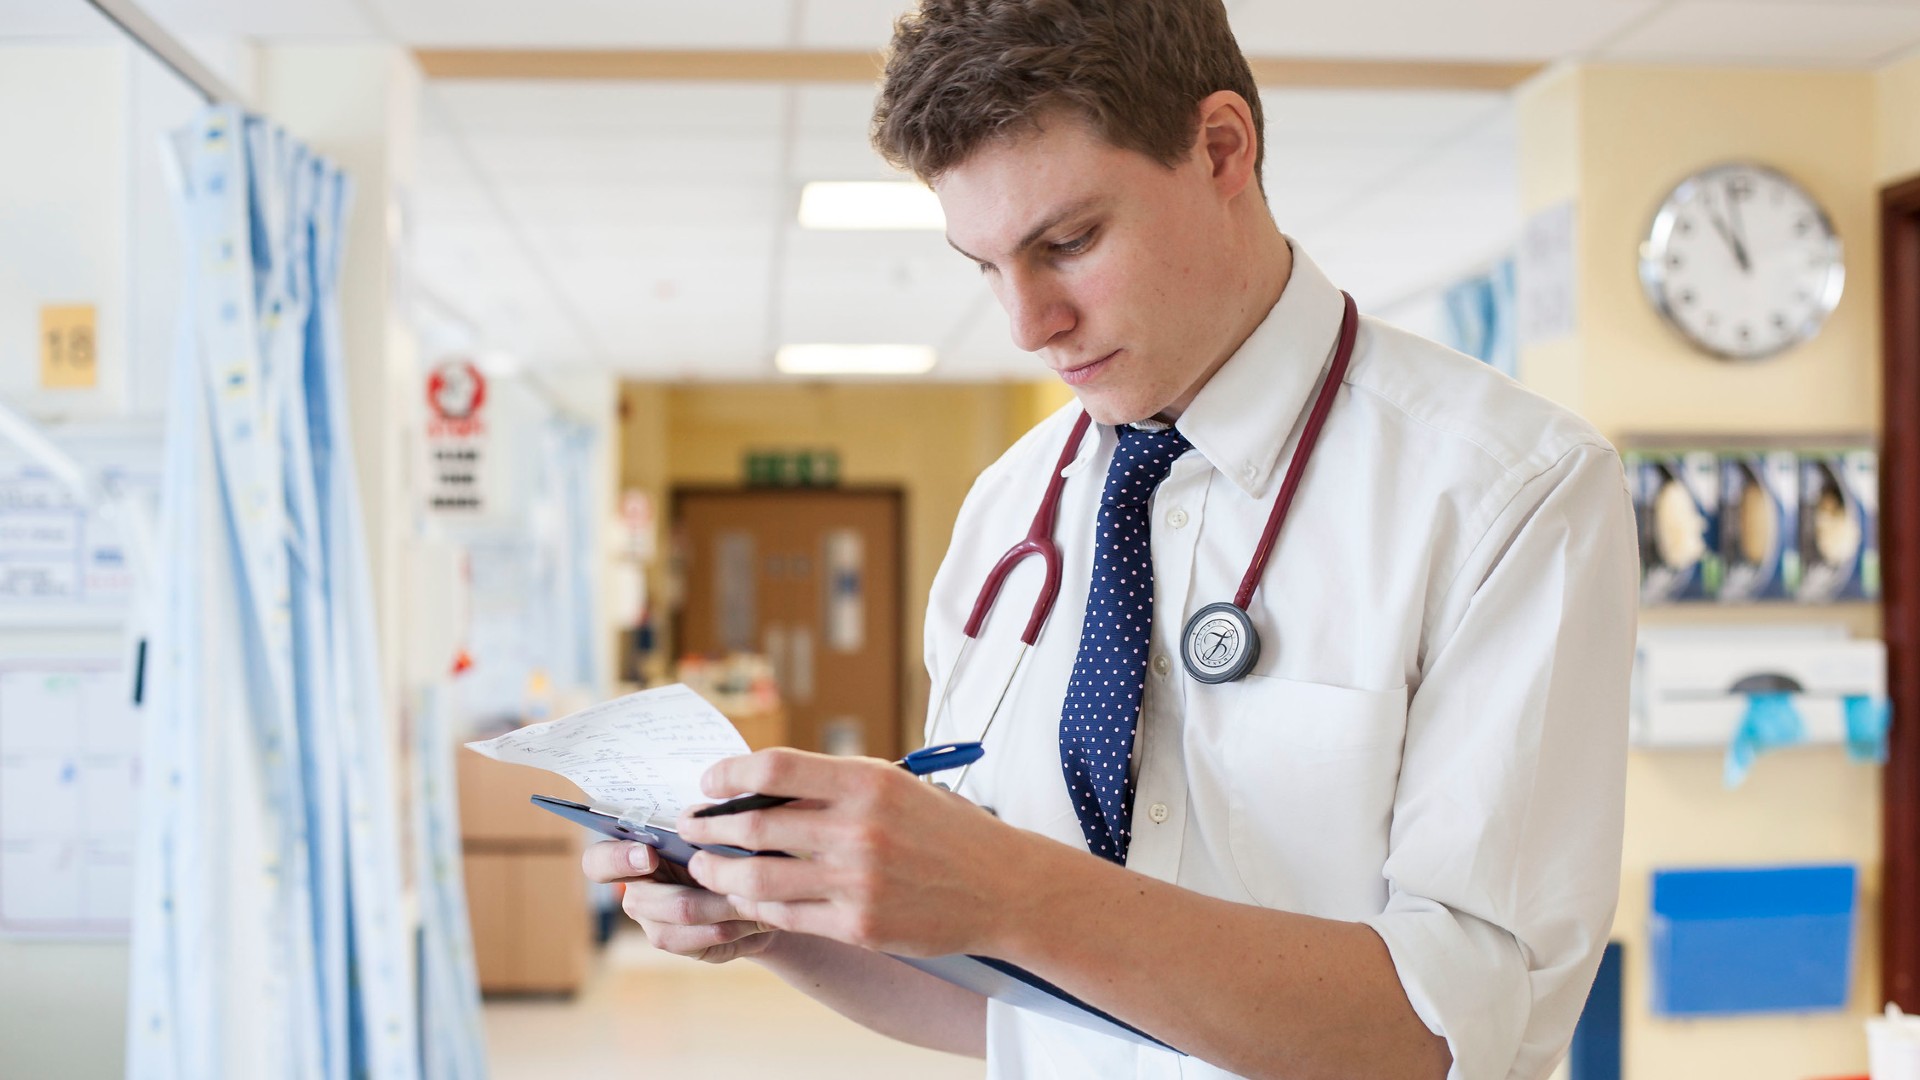 A person is stood looking at paper on a clipboard. They are wearing a stethoscope.